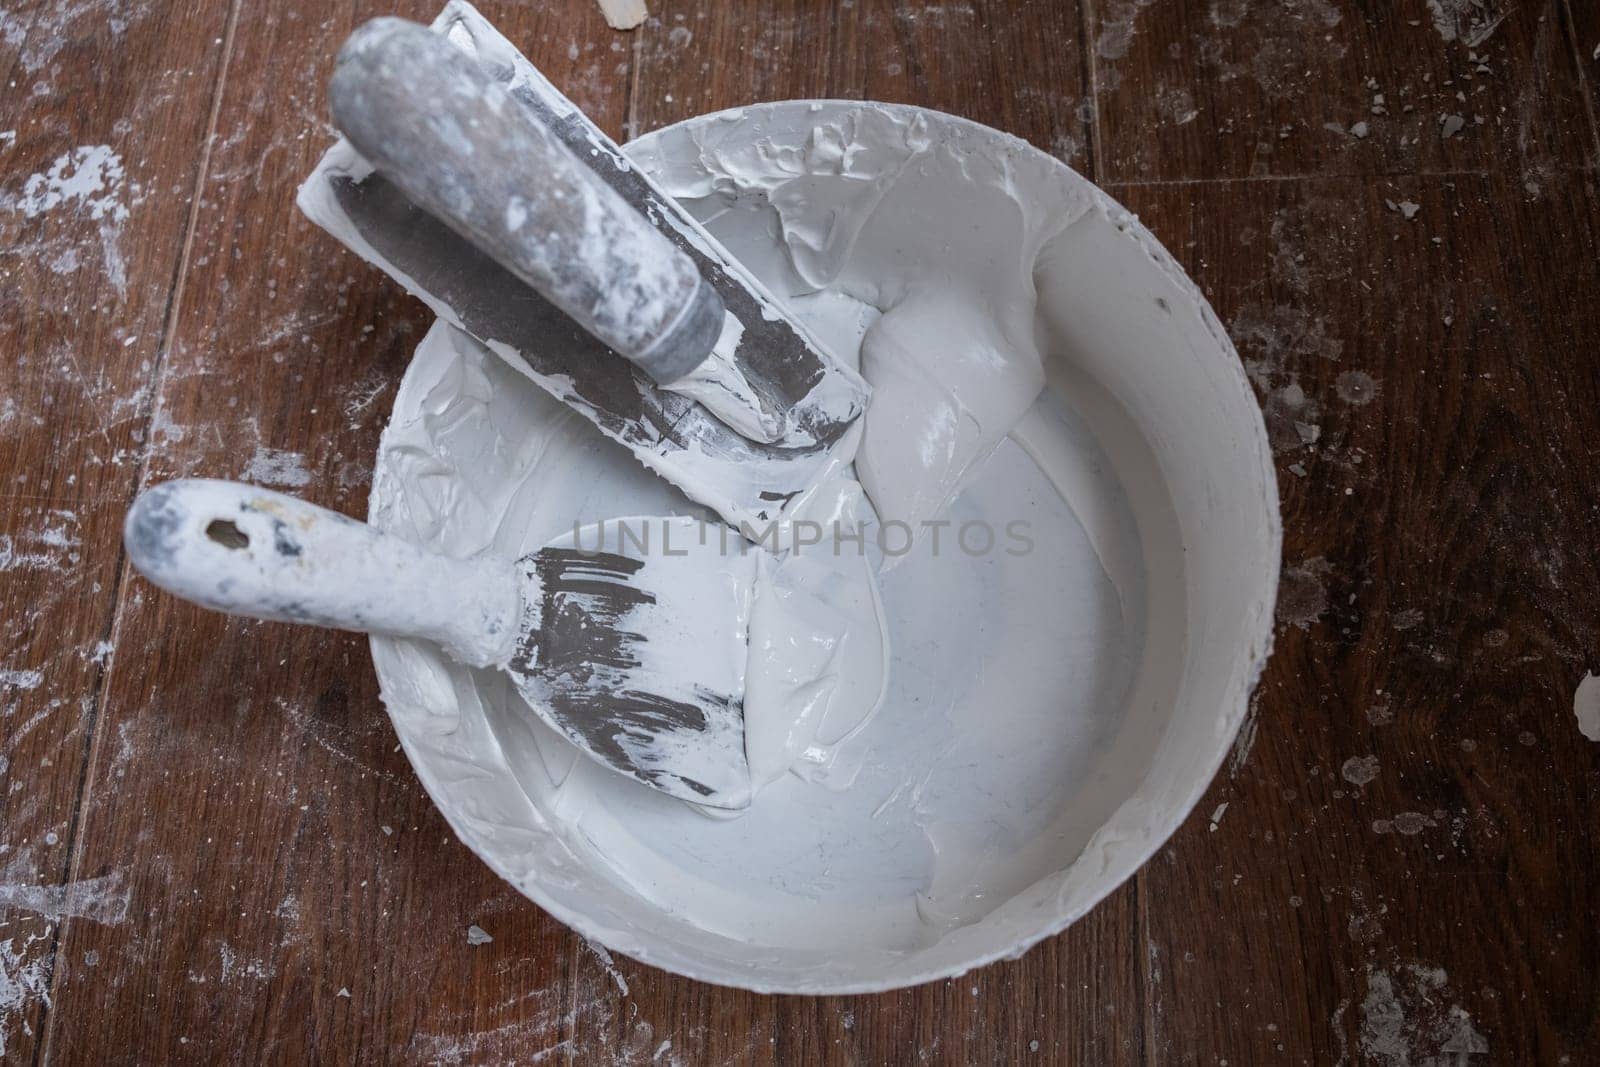 Applying decorative putty. White abstract texture of surface covered with putty. textured background of filler paste applied with putty knife in irregular dashes and strokes. Rough surface plaster